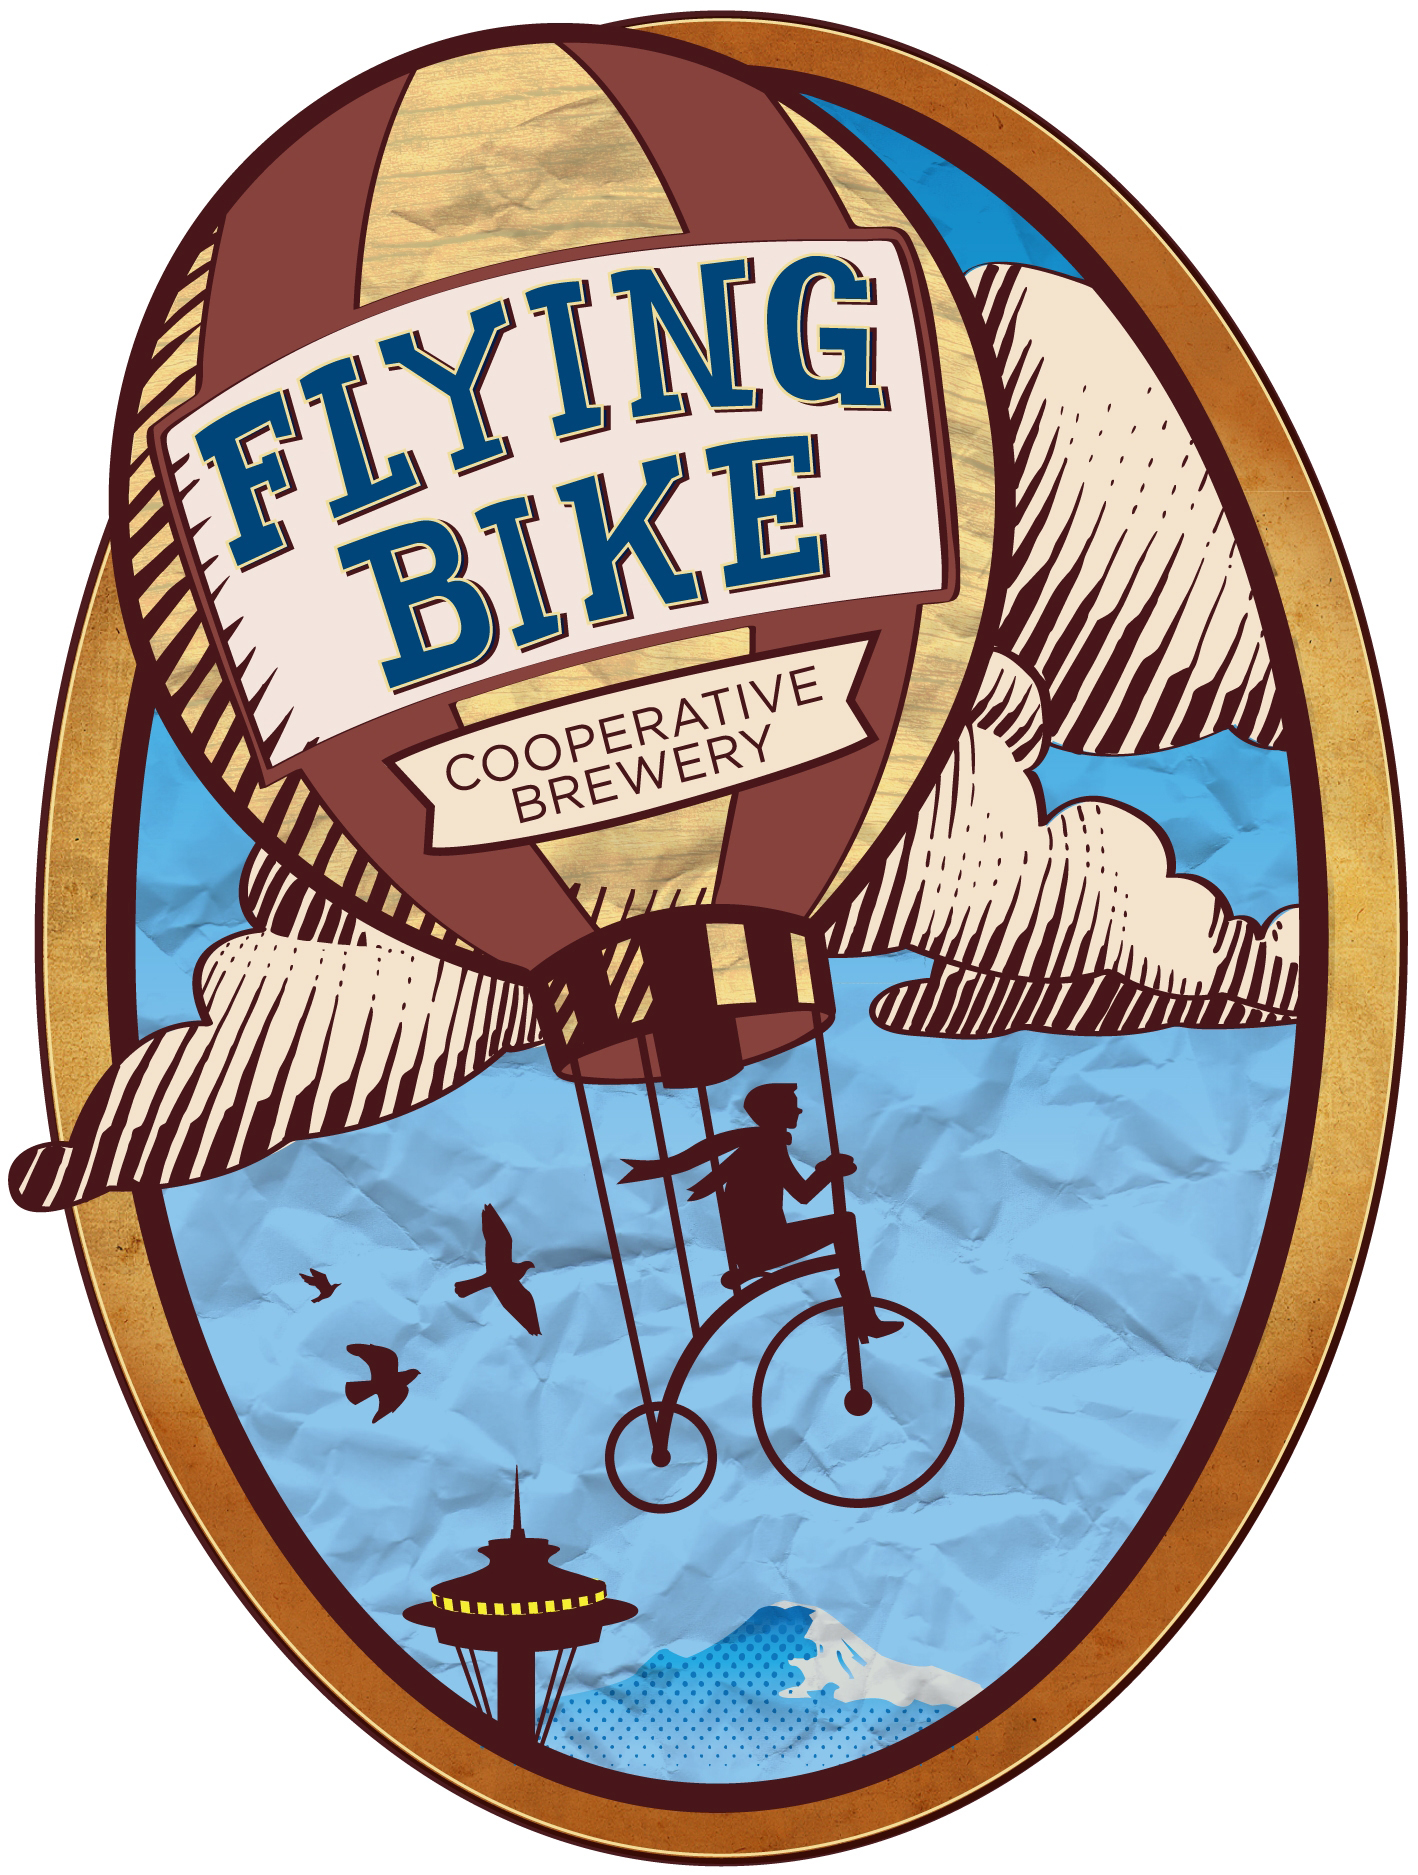 The brewing cooperative Flying Bike has announced it will open a bricks-and-mortar